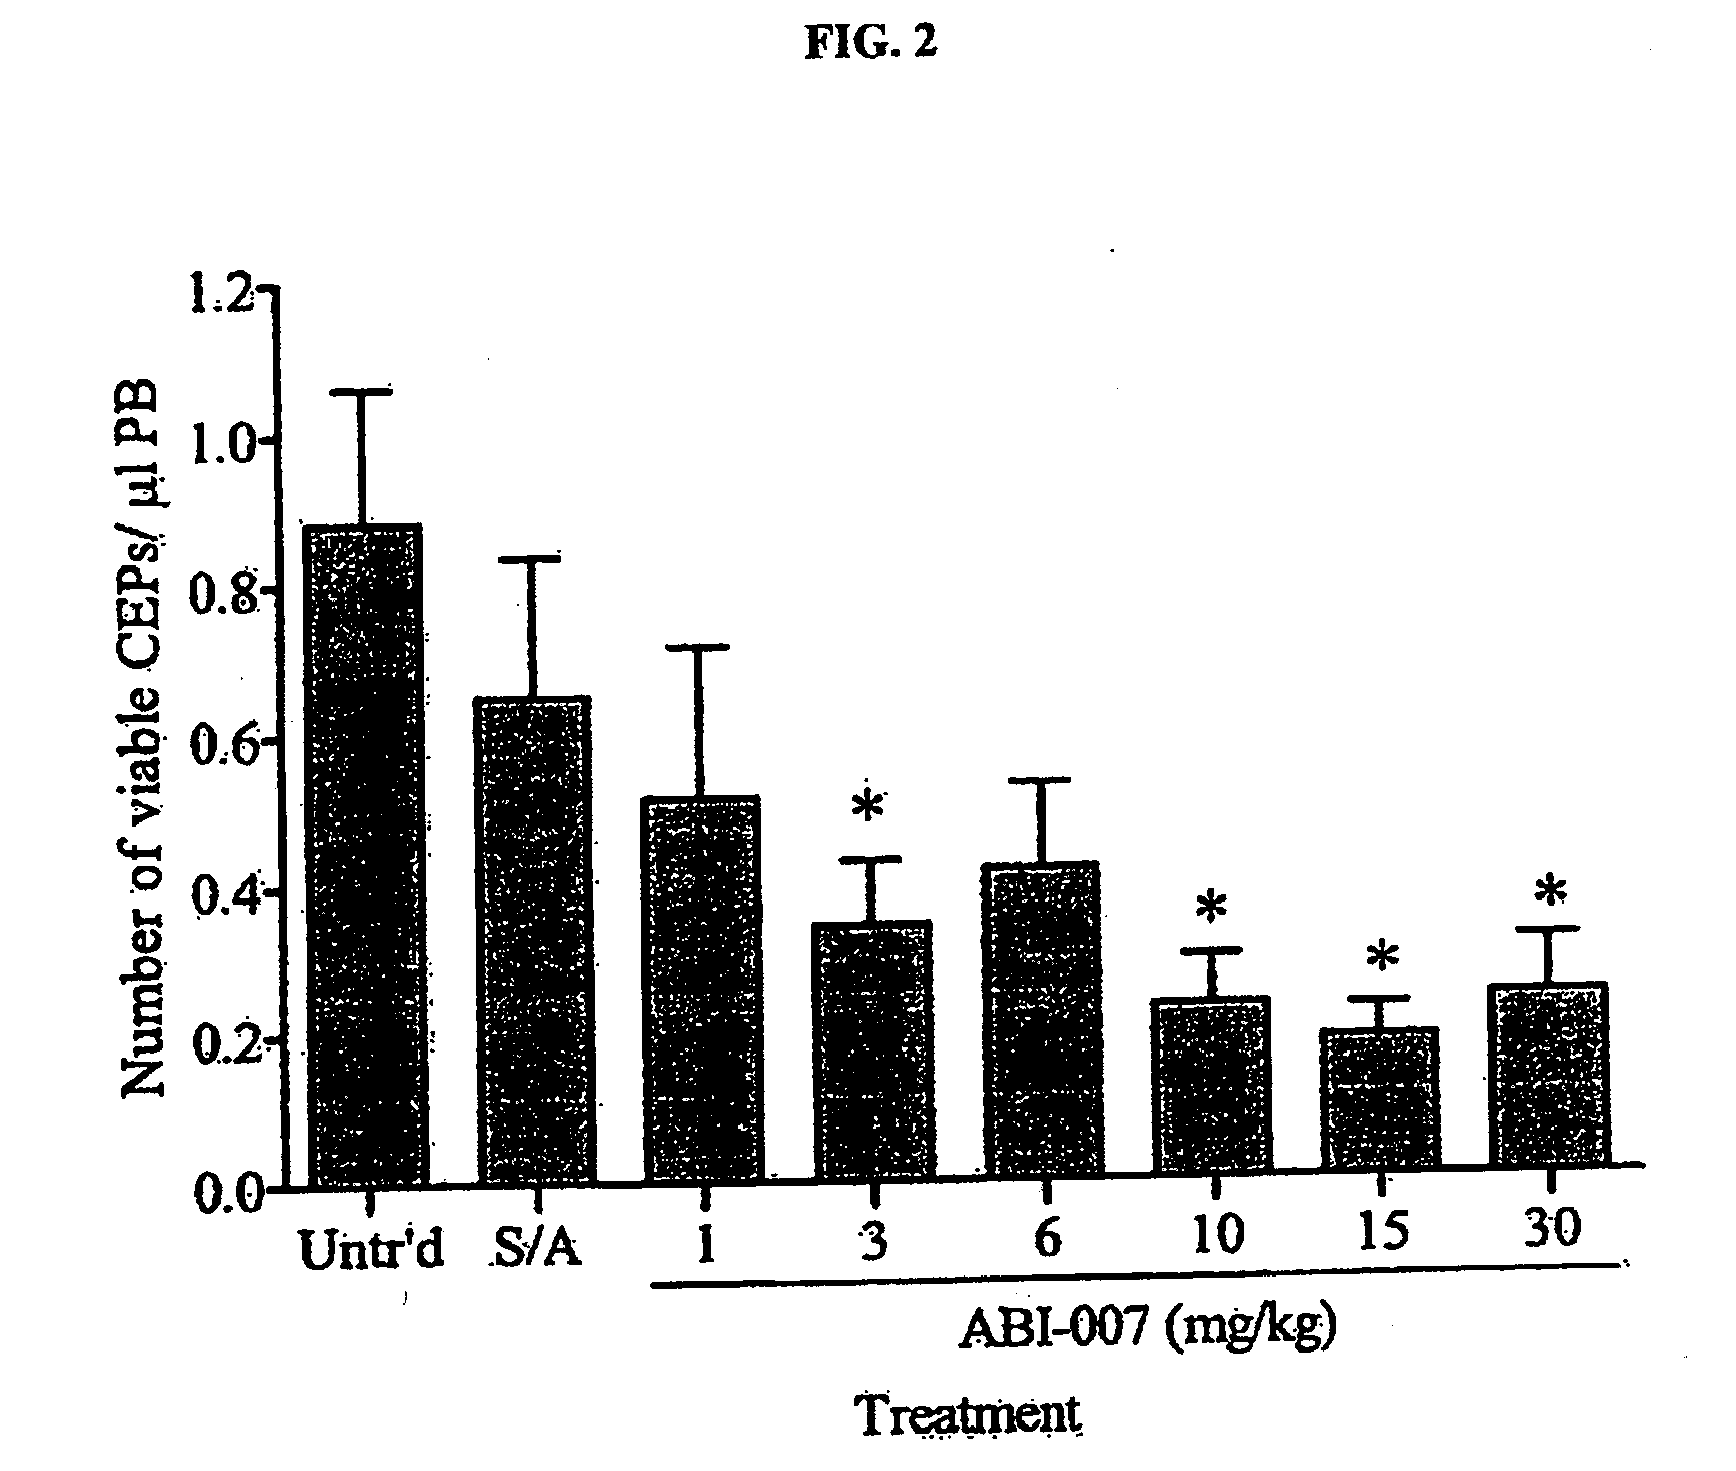 Breast cancer therapy based on hormone receptor status with nanoparticles comprising taxane